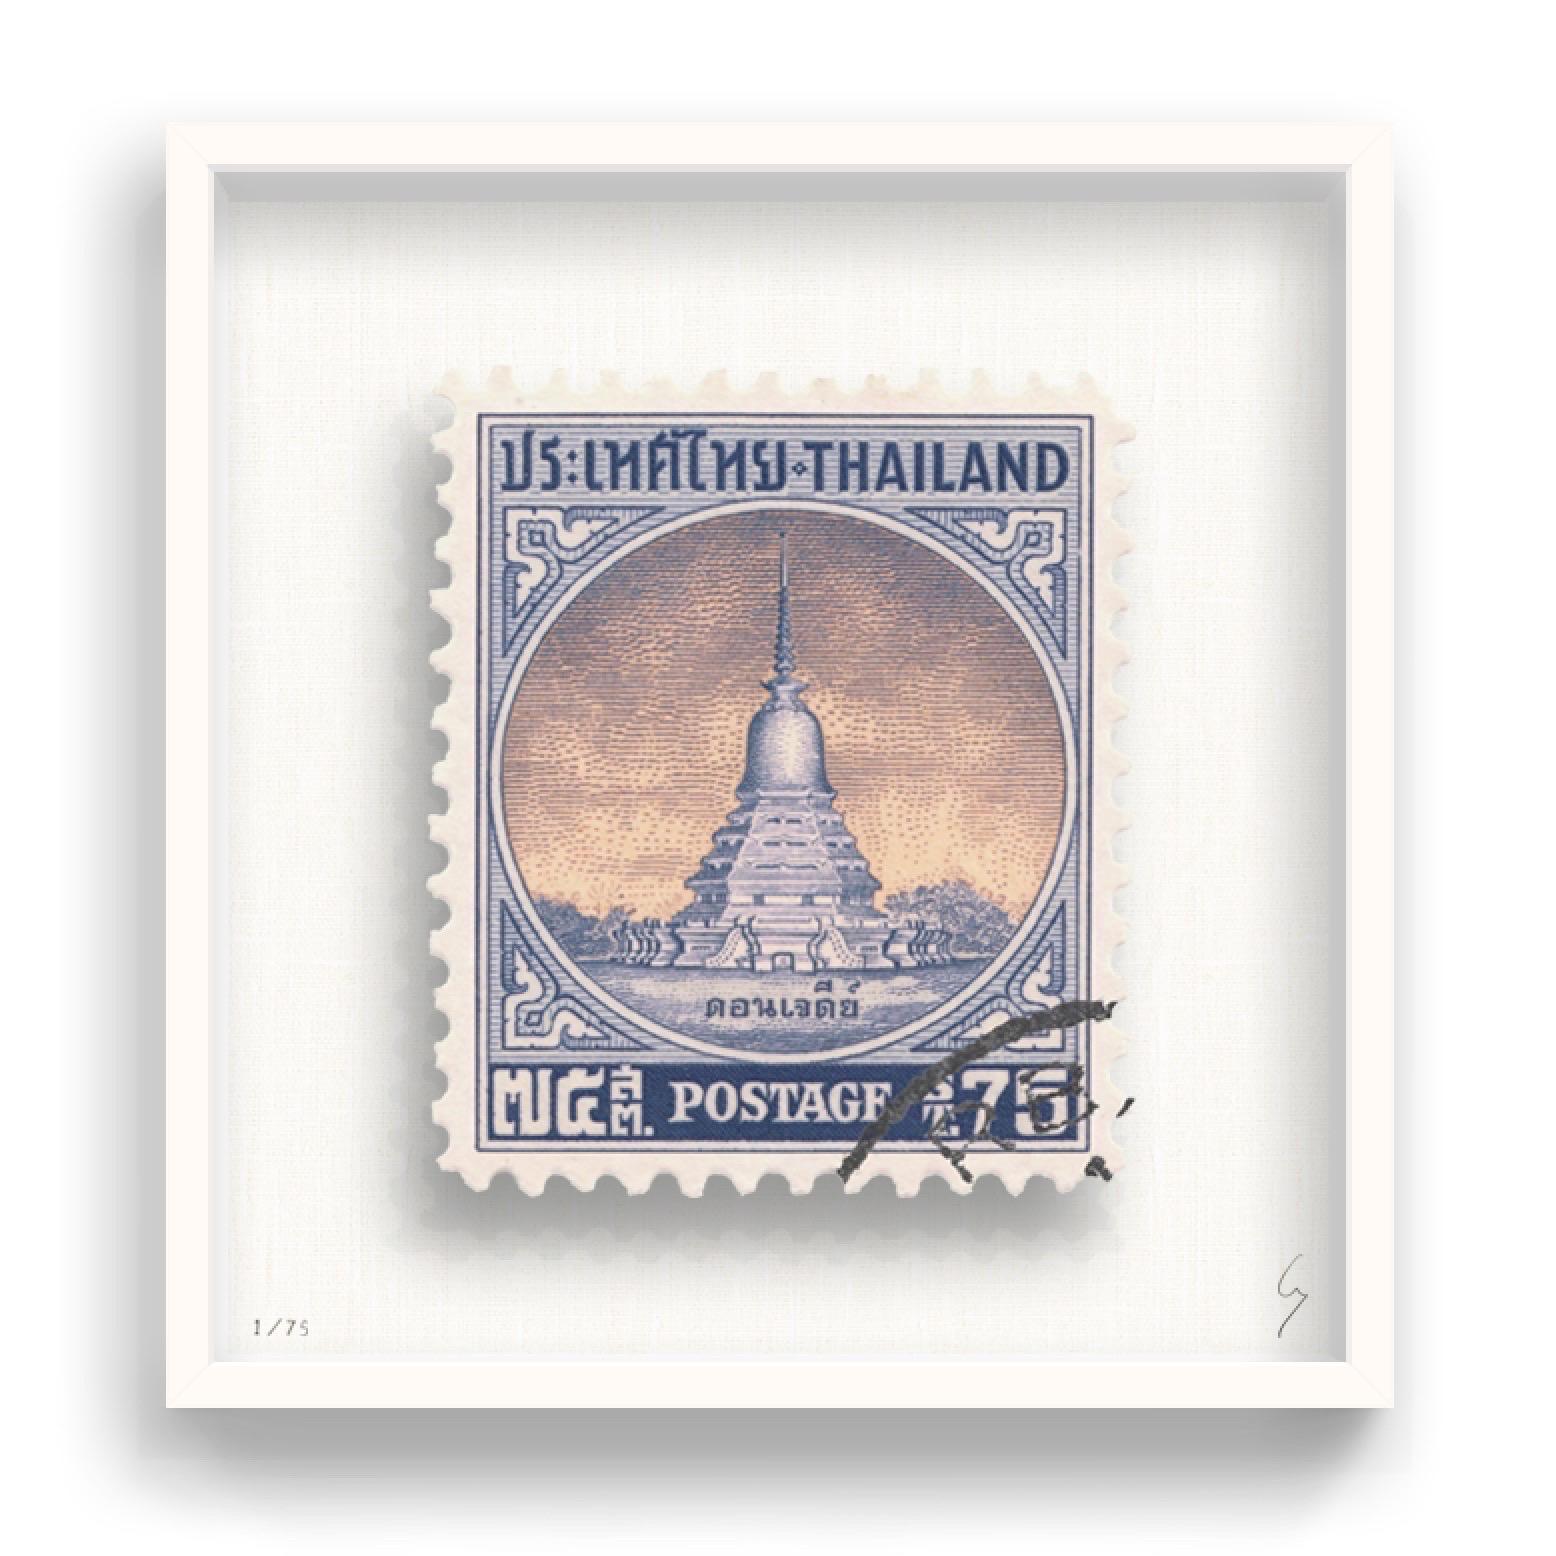 Guy Gee, Thailand (medium)

Hand-engraved print on 350gsm on G.F Smith card
31 x 35 cm (12 1/5 x 13 4/5)
Frame included 
Edition of 75 

Each artwork by Guy had been digitally reimagined from an original postage stamp. Cut out and finished by hand,